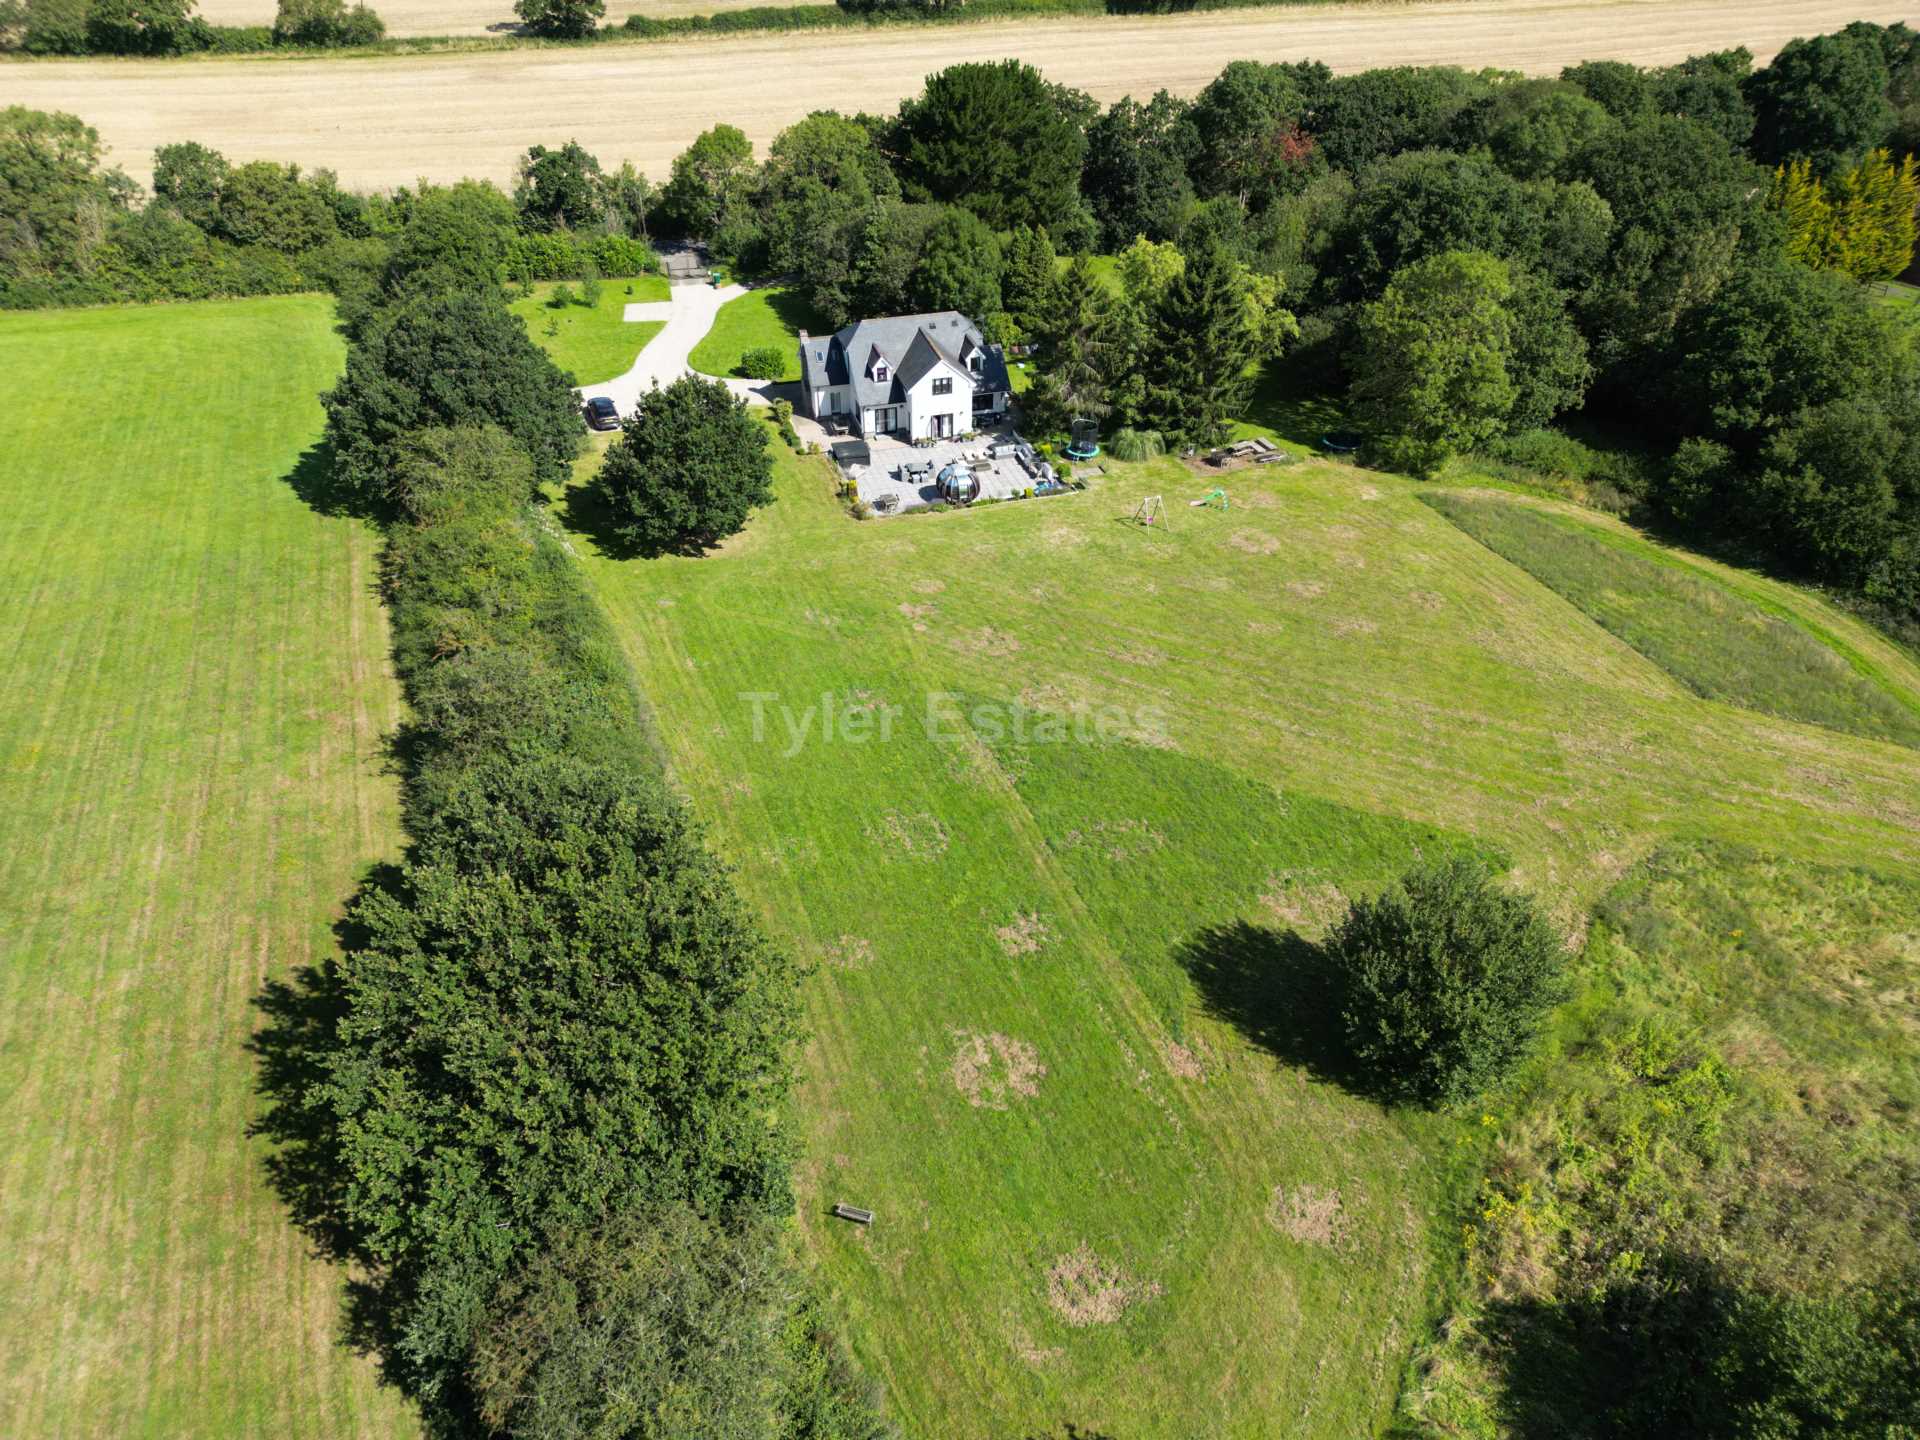 Outwood Farm Road, Billericay, Image 28